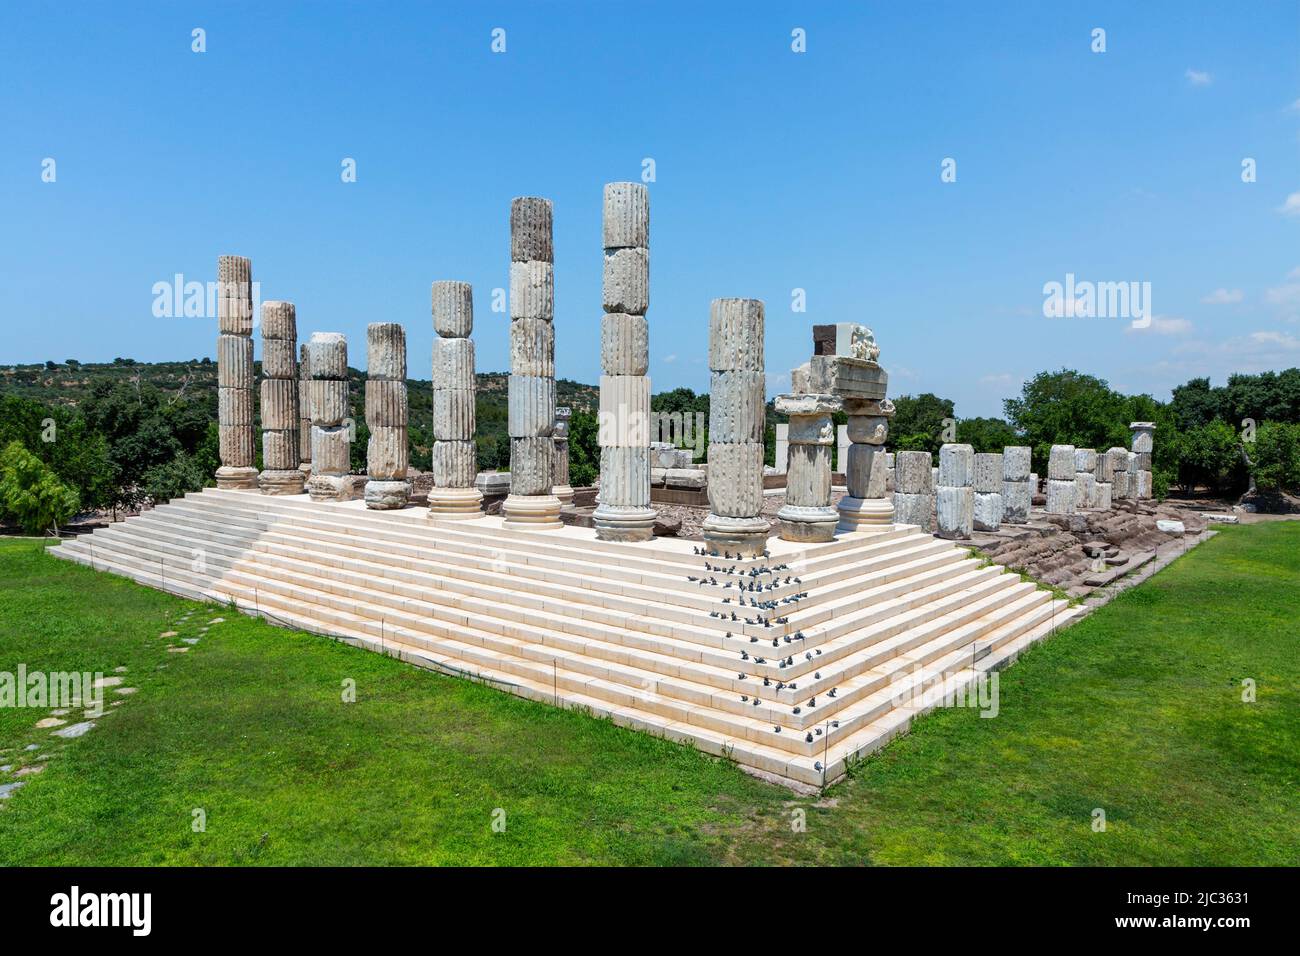 Ruins of the sanctuary of Apollon Smintheus in Ayvacik, Turkey, coming from the word sminthos meaning mice as Apollo killed mice damaging the fields. Stock Photo